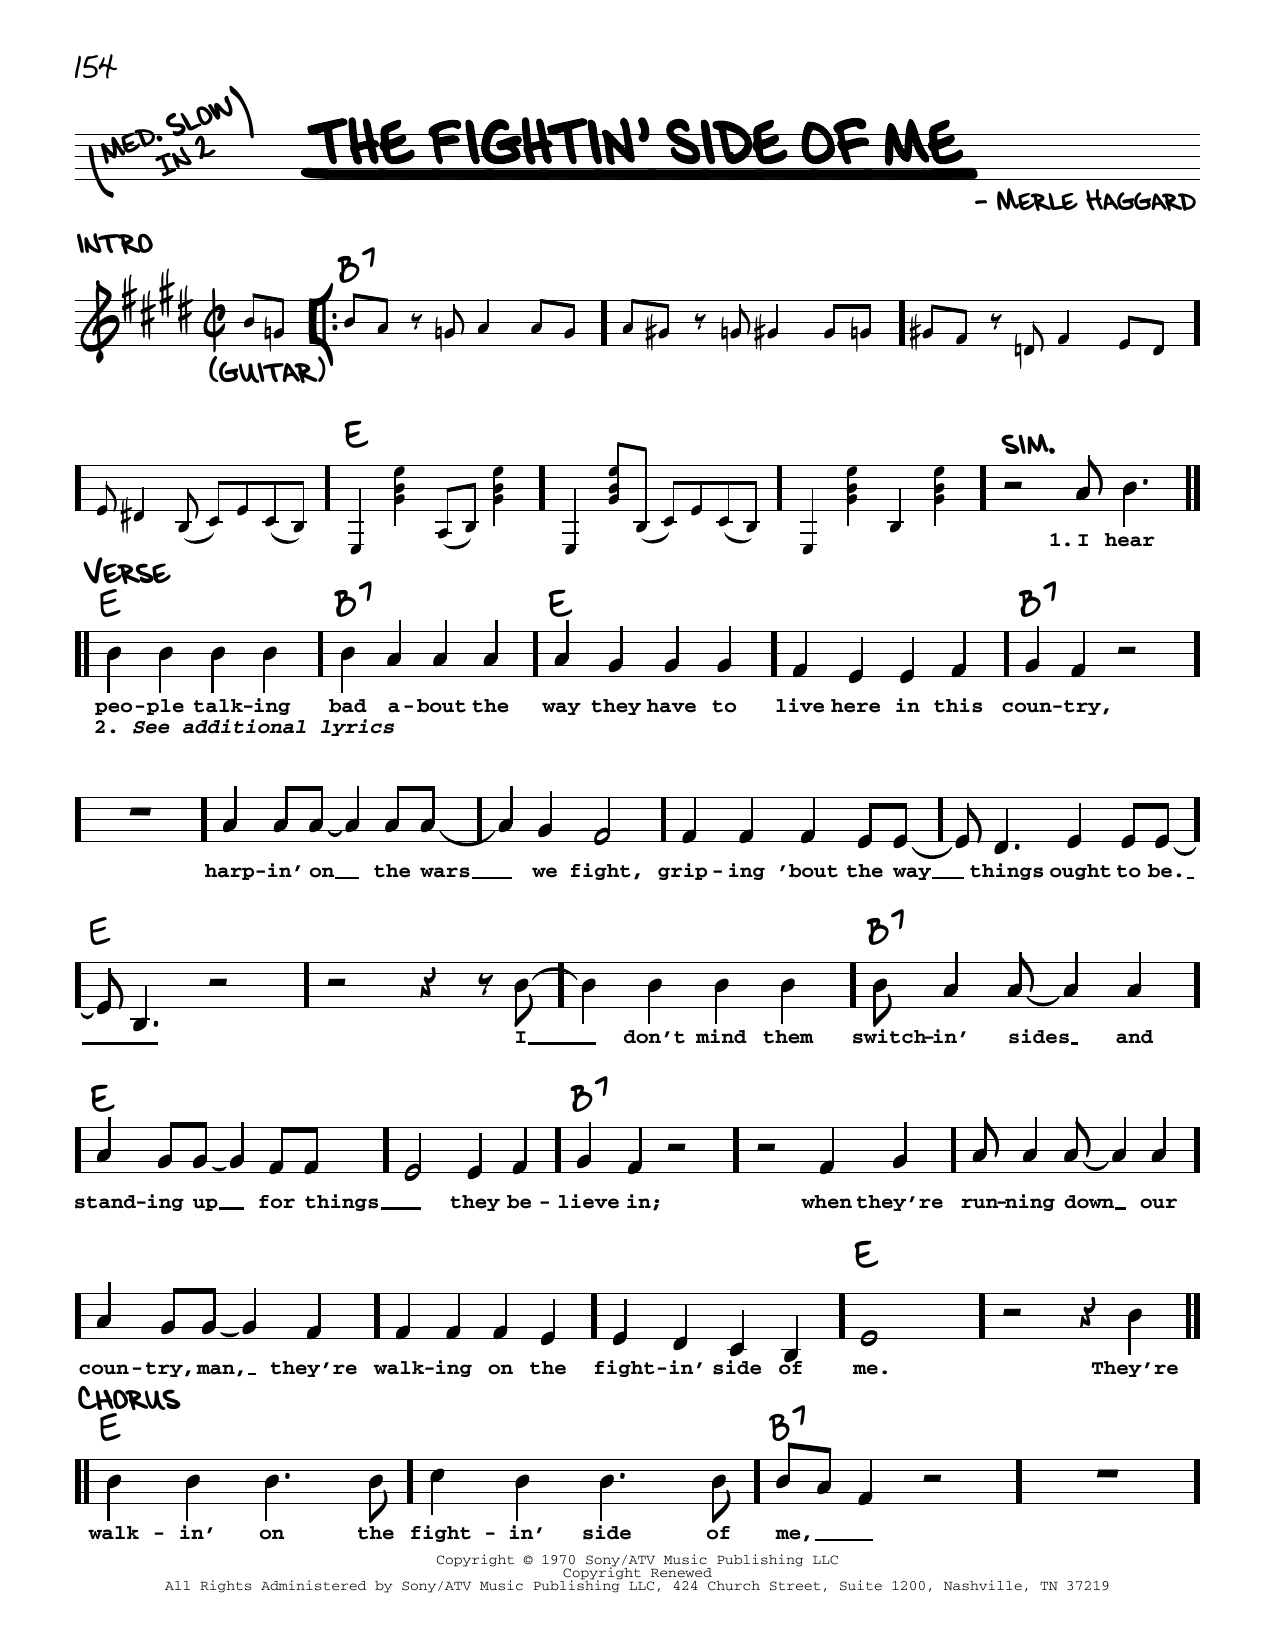 Download Merle Haggard The Fightin' Side Of Me Sheet Music